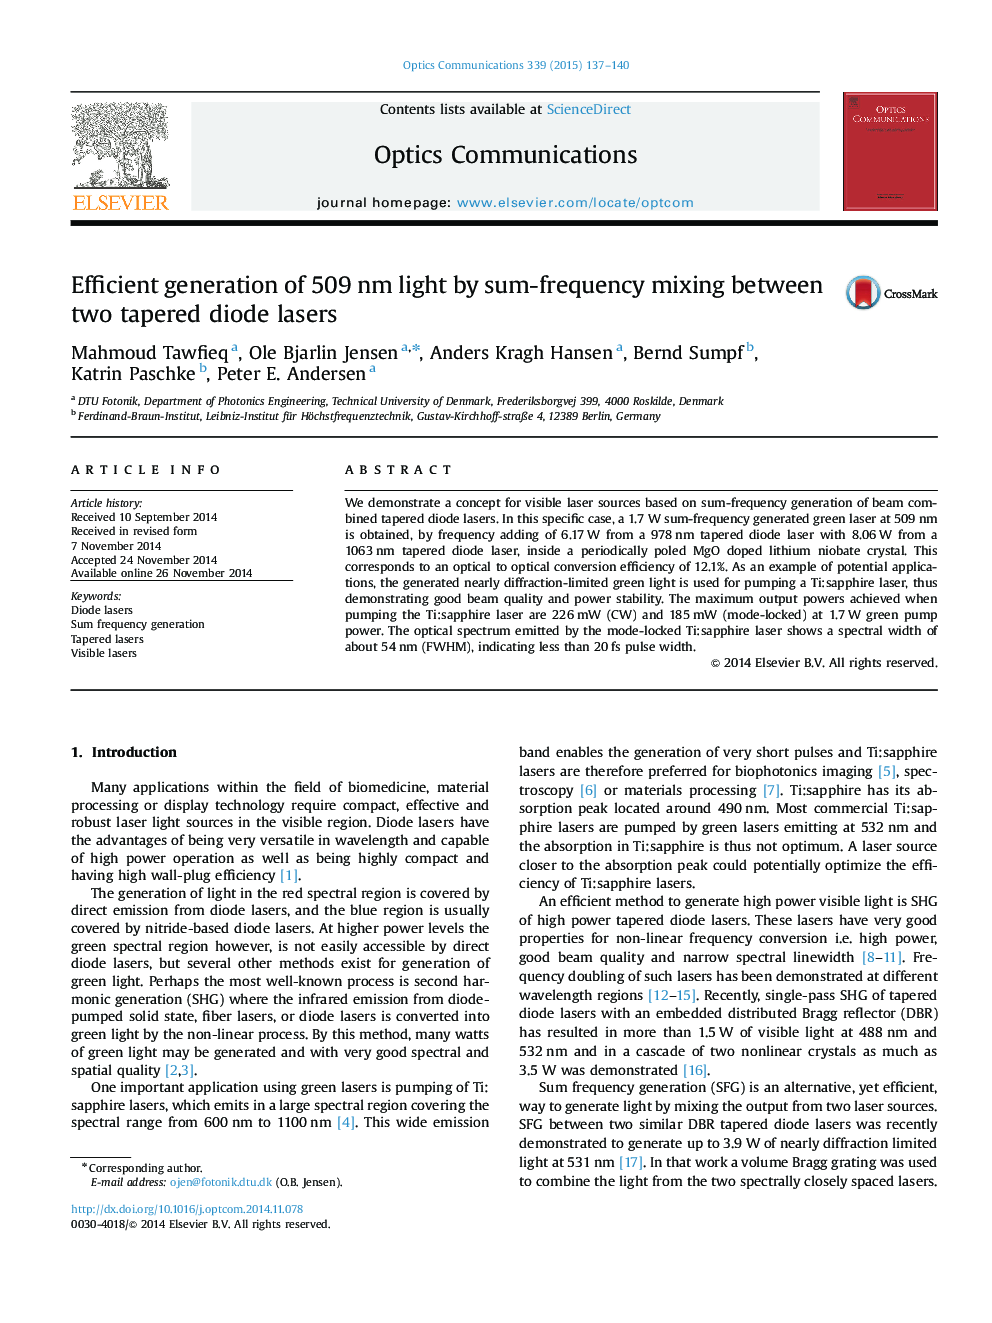 Efficient generation of 509 nm light by sum-frequency mixing between two tapered diode lasers